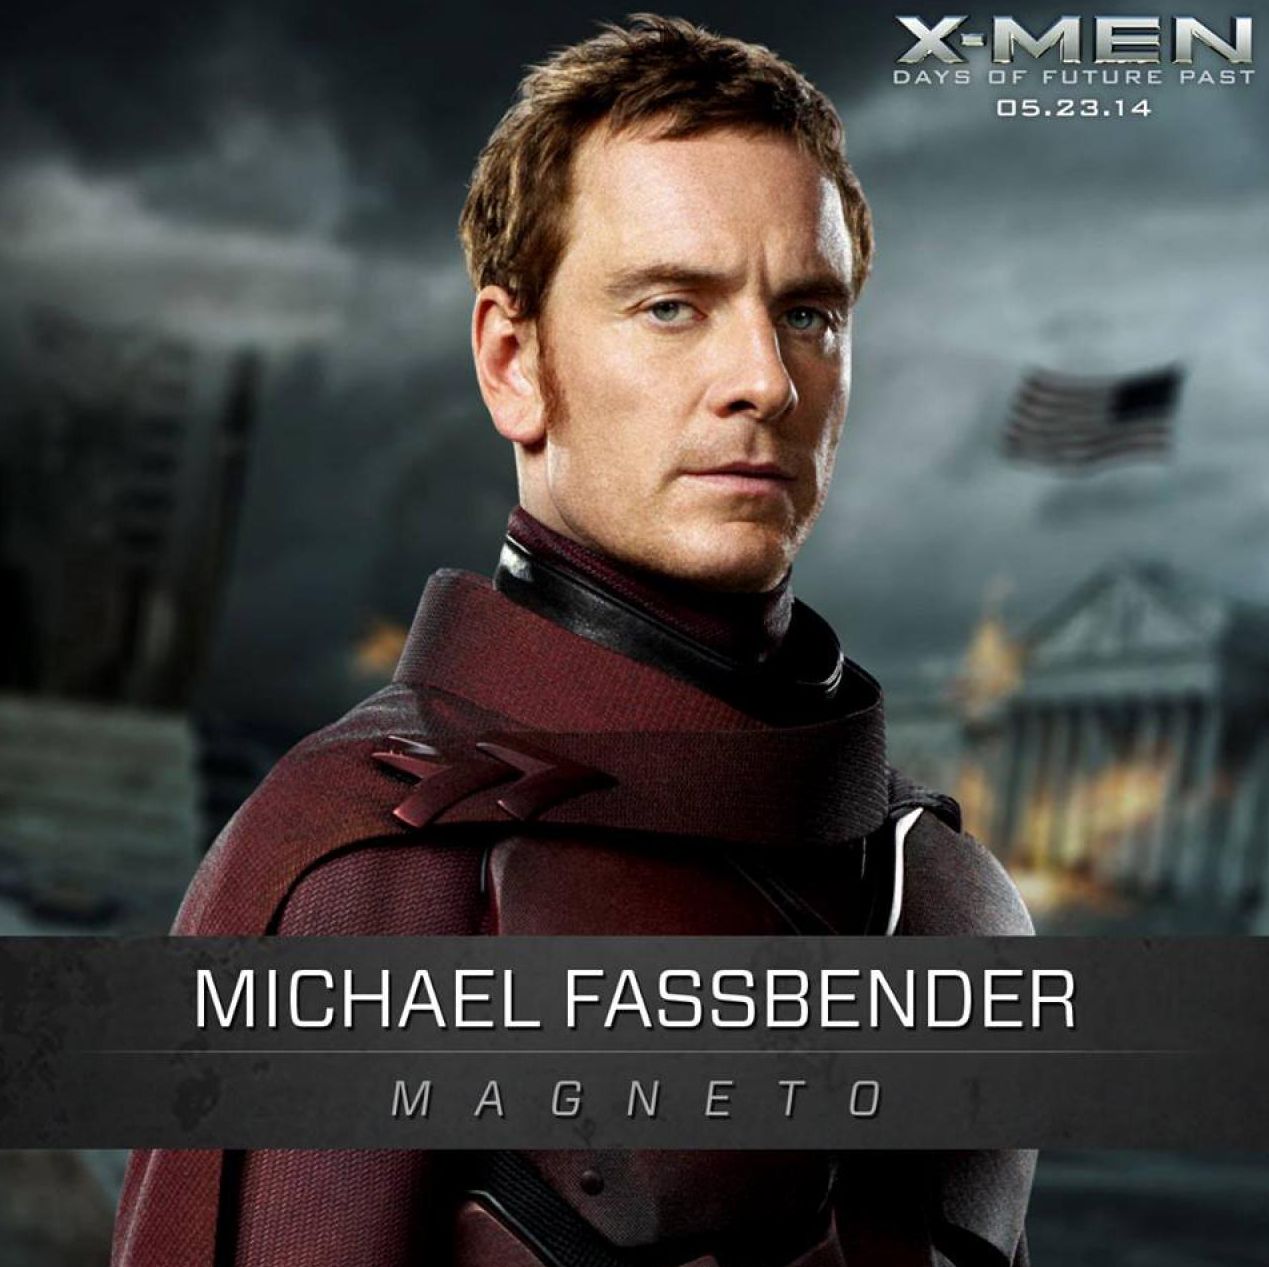 Michael Fassbender as Magneto in X-Men: Days Of Future Past